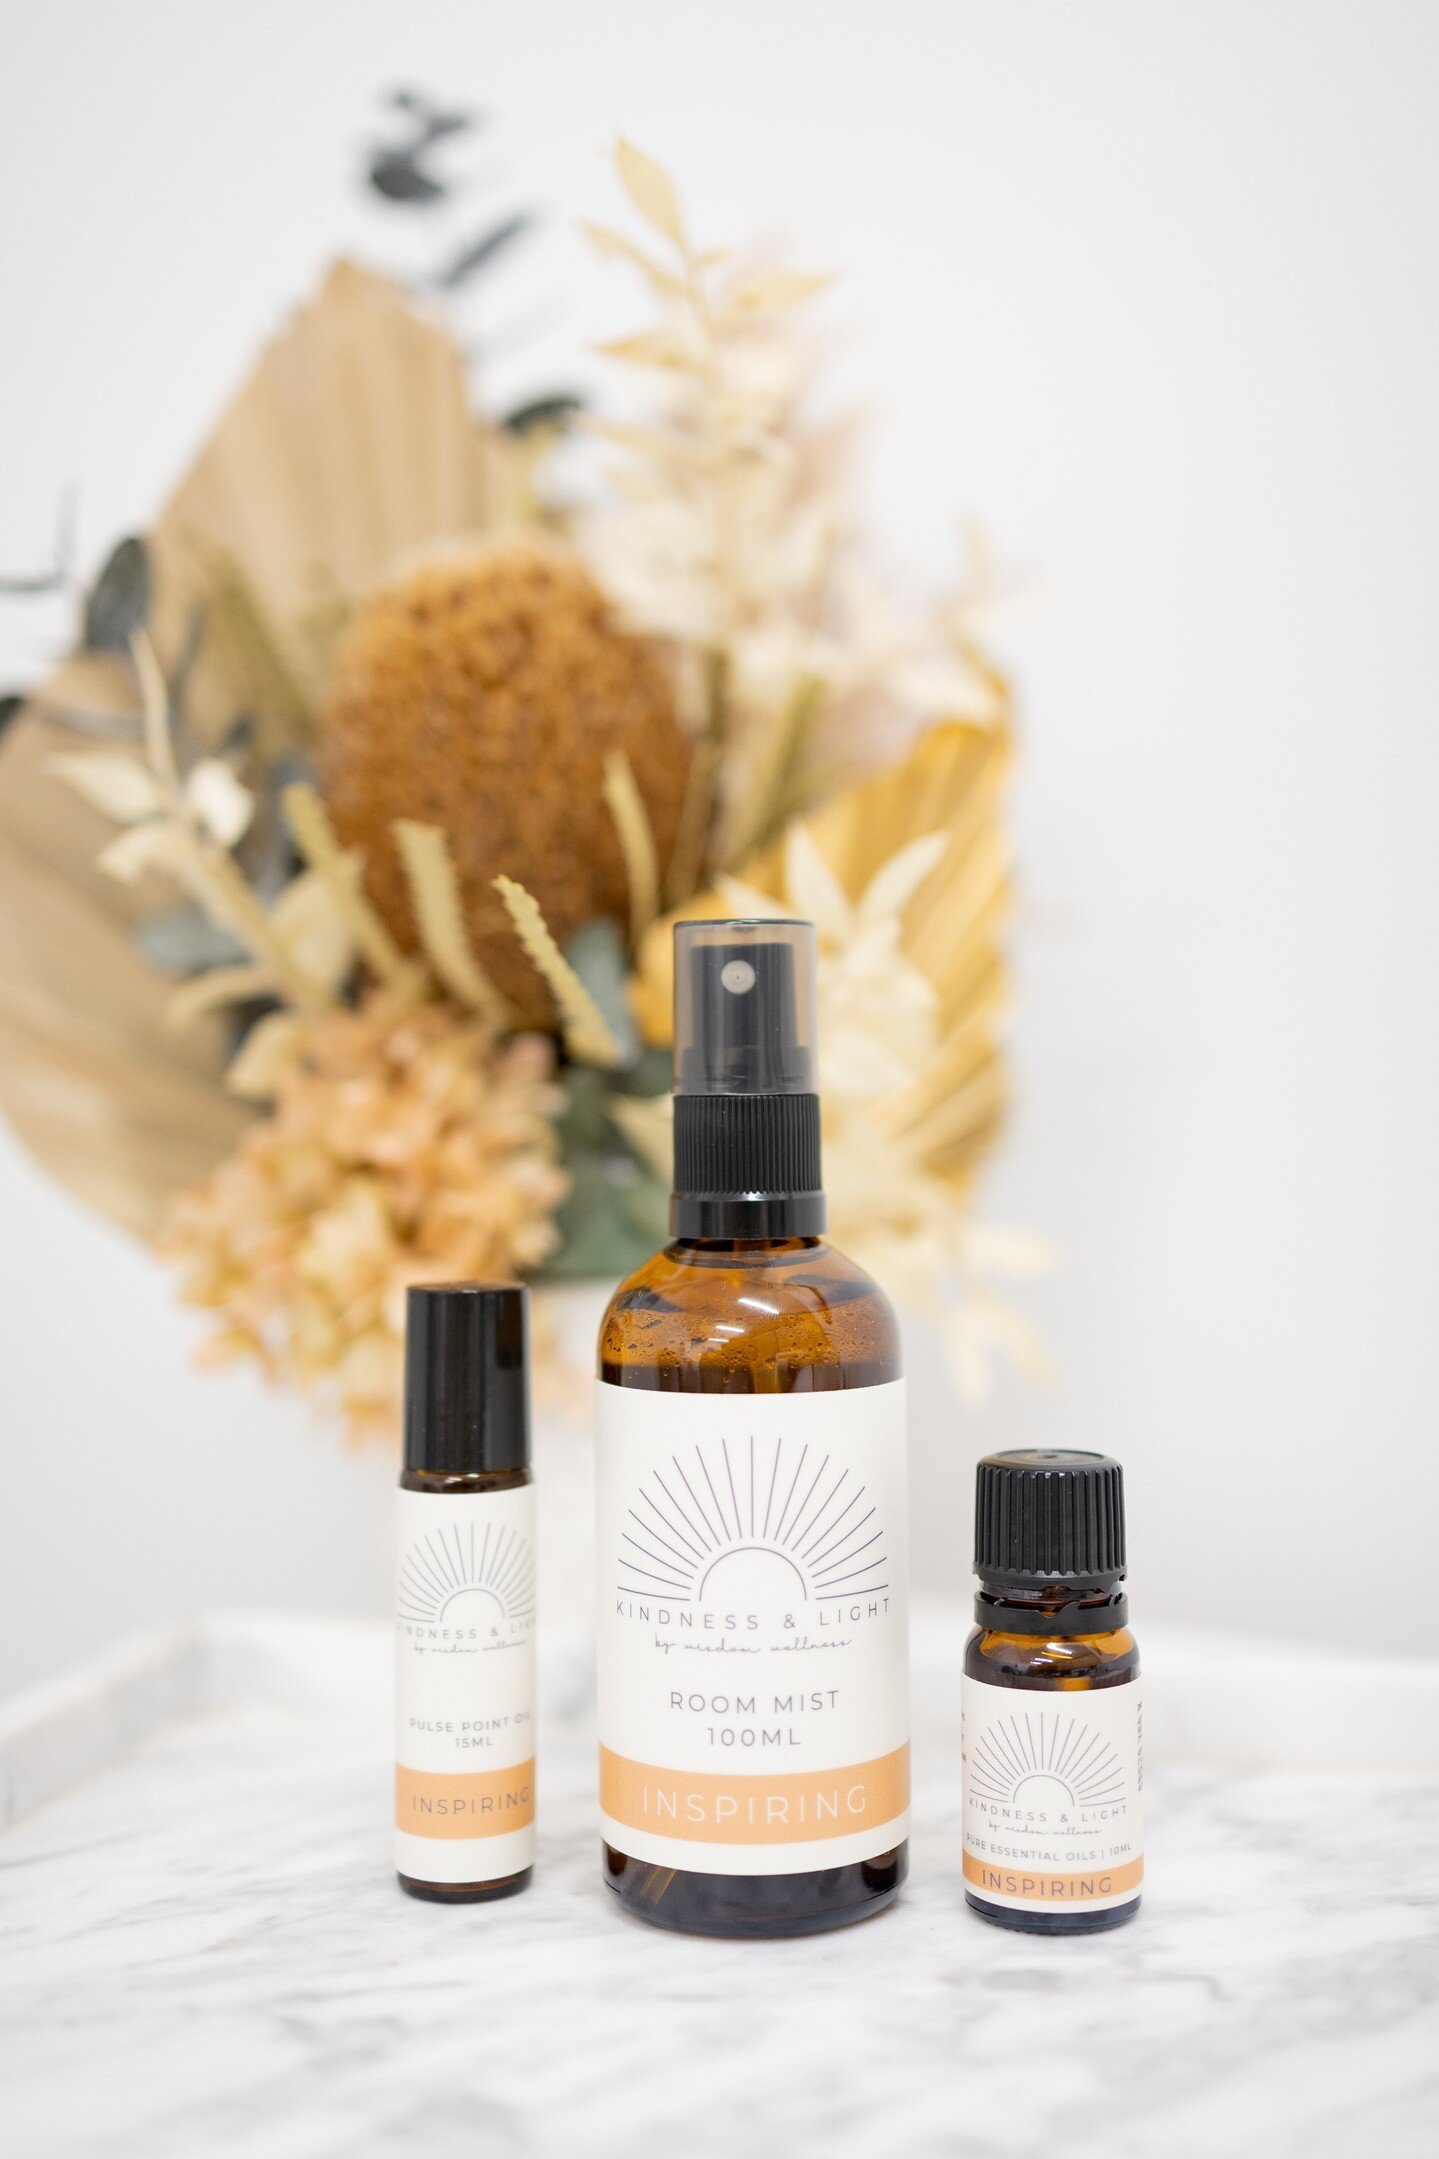 THE KINDNESS &amp; LIGHT INSPIRING RANGE ➖ 

Our Inspiring Essential Oil, Room Mist and Pulse Point Oil. 

A synergistic blend created with love to uplift whilst inspiriting a sense of clarity, awareness, focus and calm. The blend has an enlightening